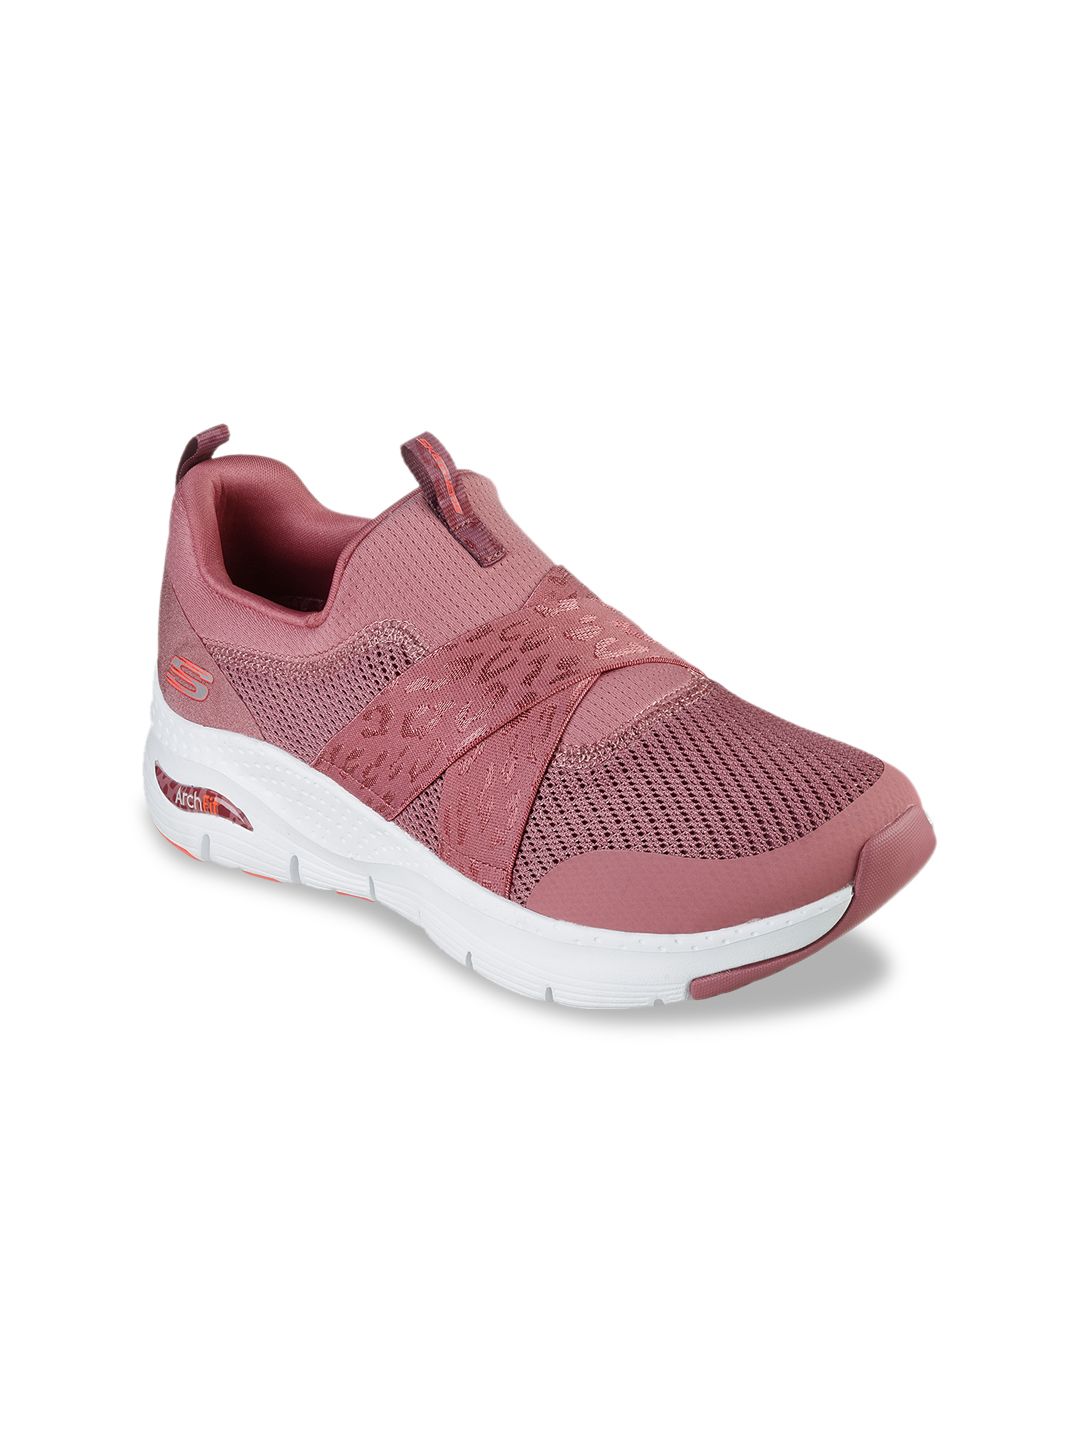 Skechers Women Peach-Coloured ARCH FIT Regular Walking Shoes Price in India